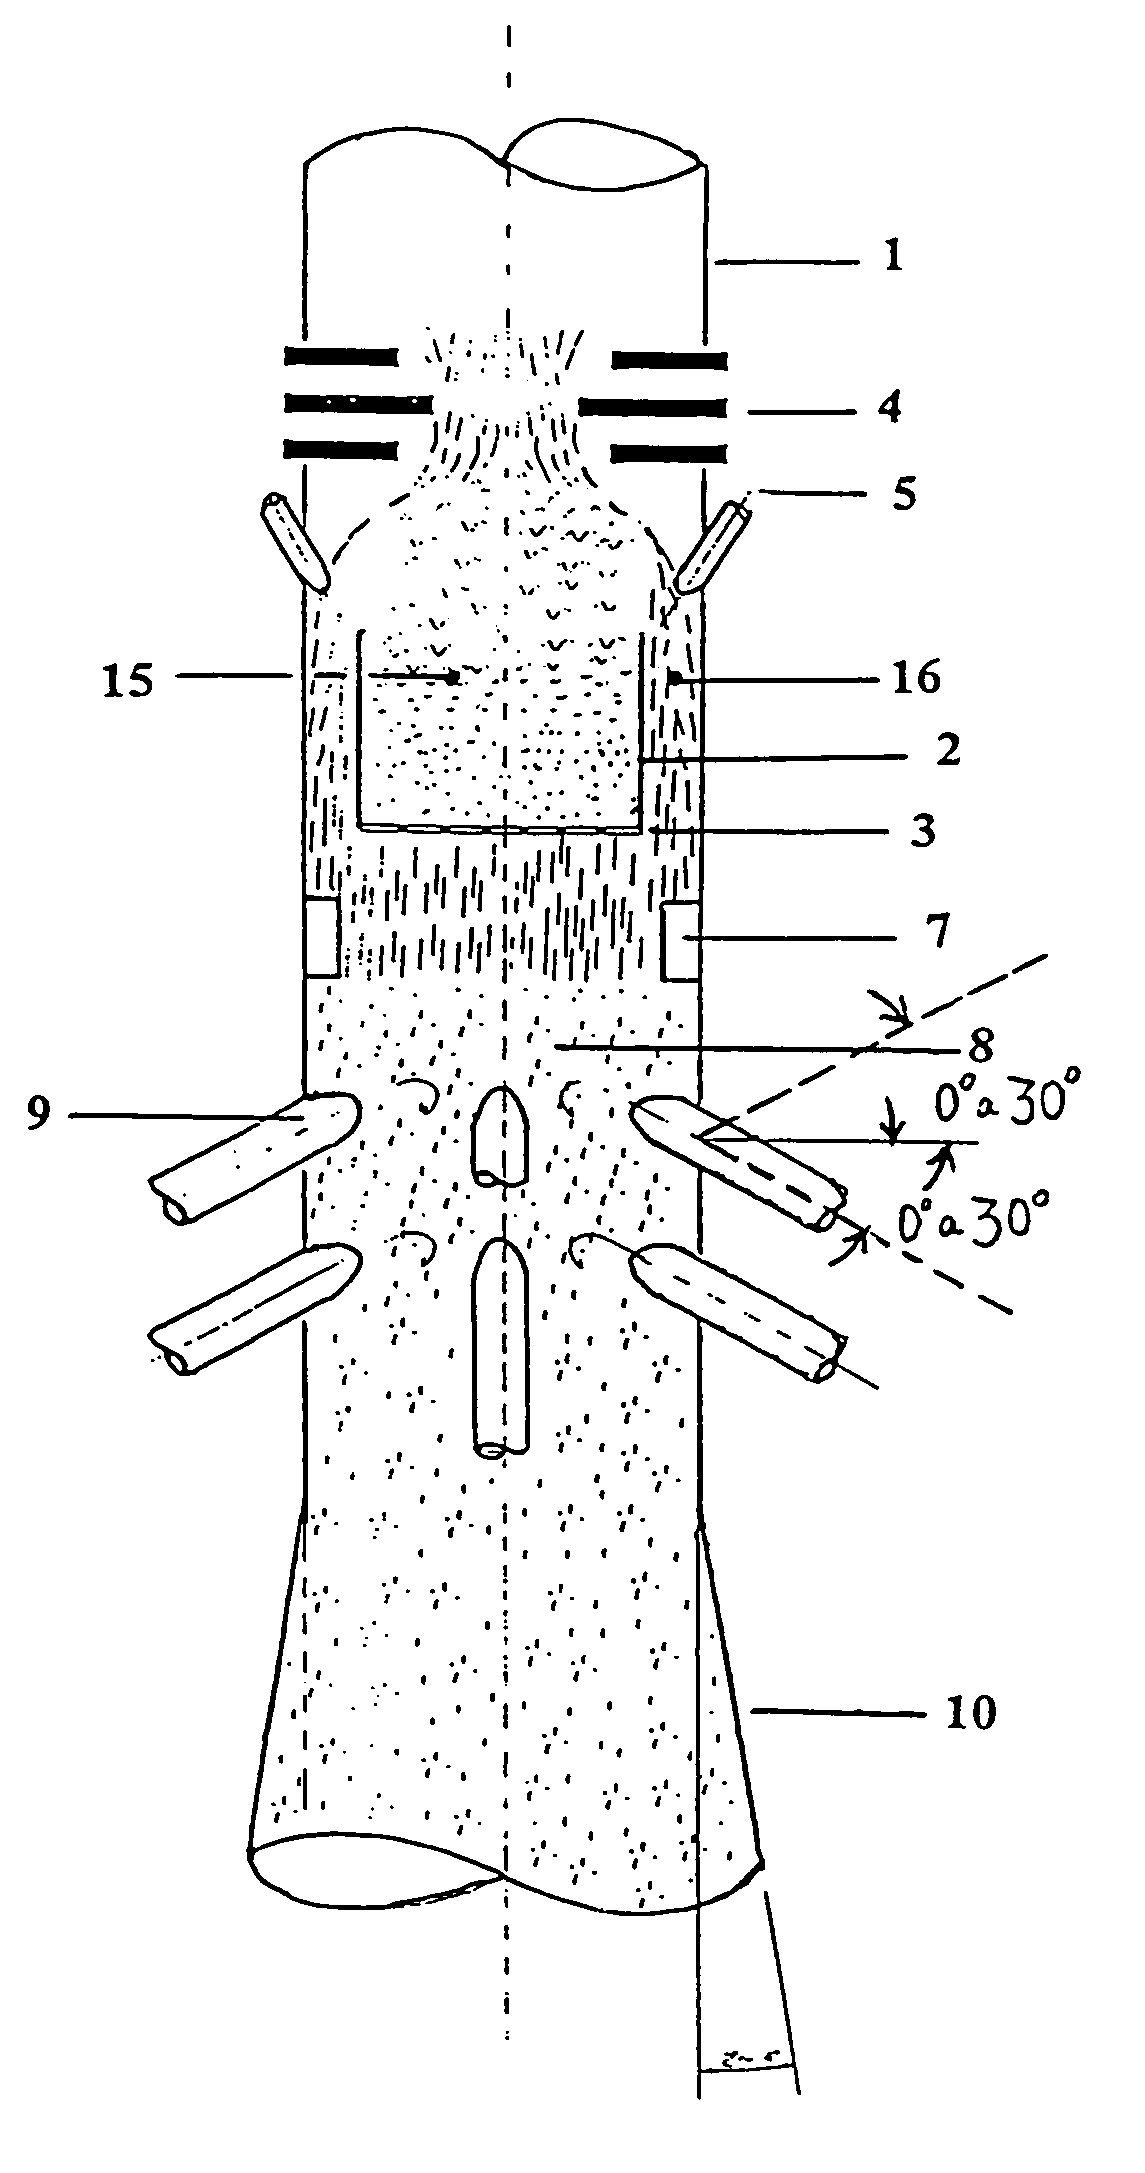 Multifunctional entry device for a downward flow tube reactor